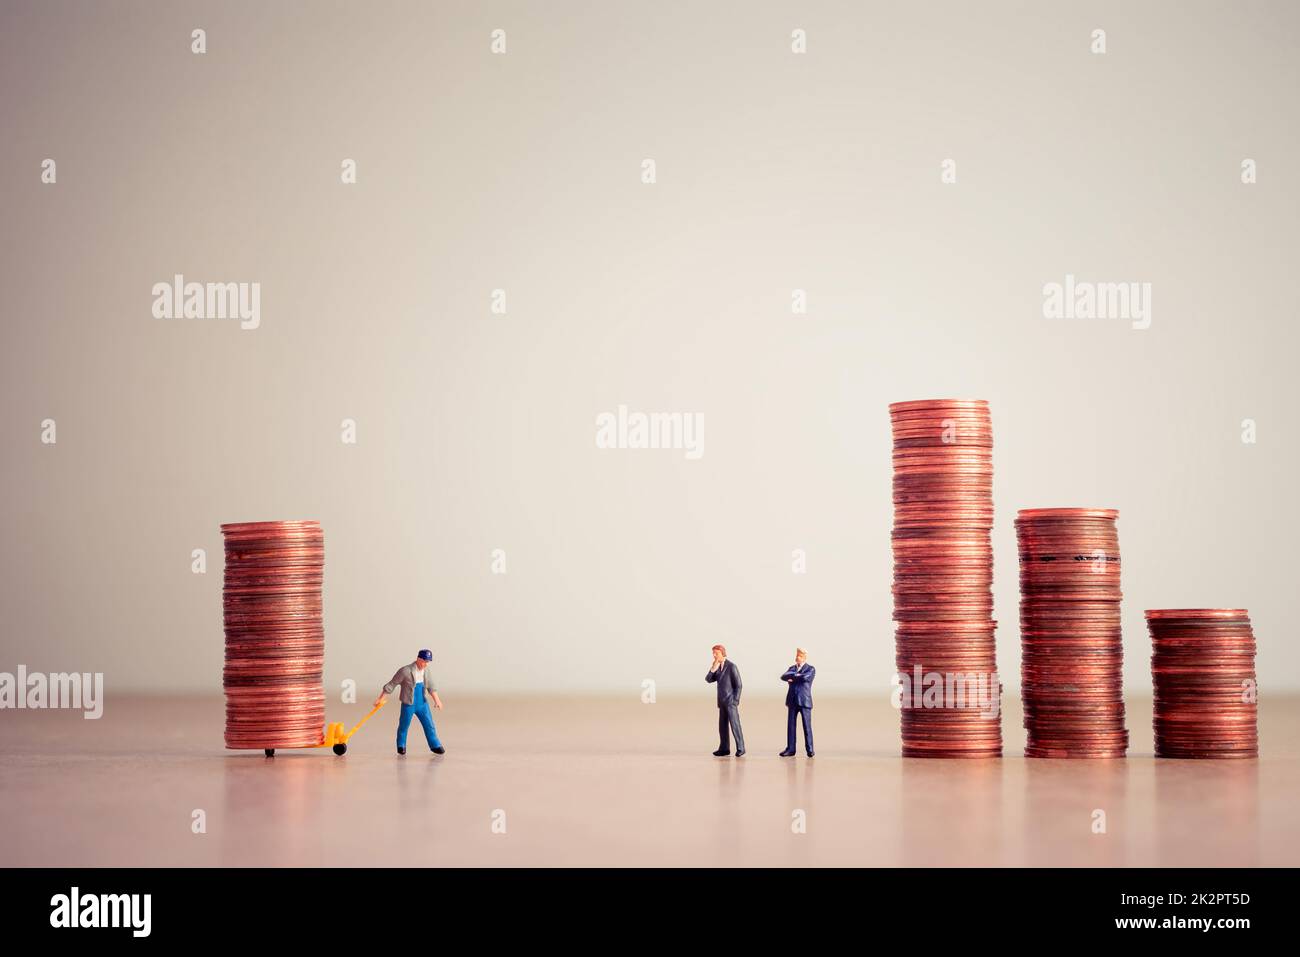 Payment of debts. Business and money concept Stock Photo